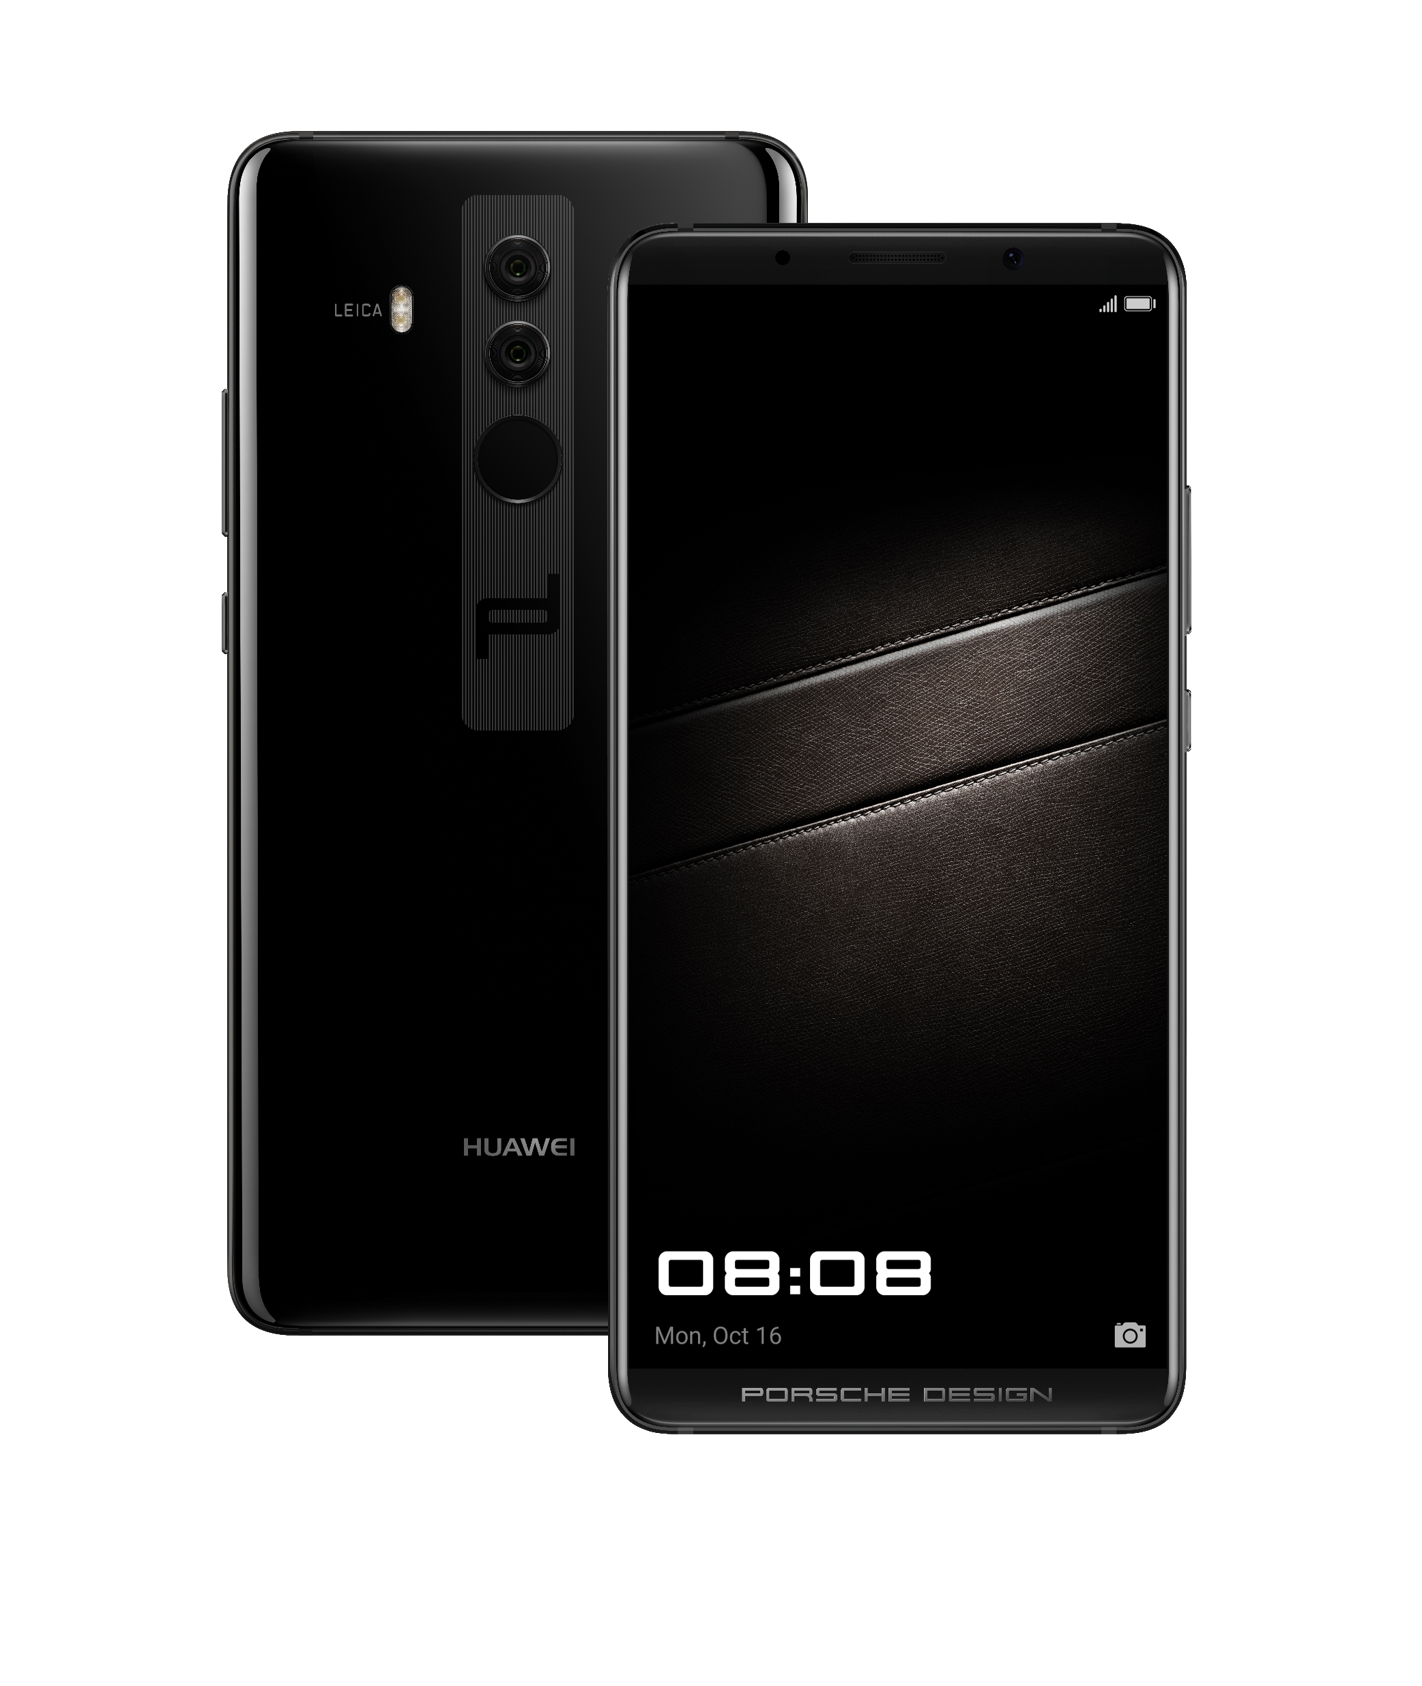 HUAWEI Mate 10 Pro with Porchse Design